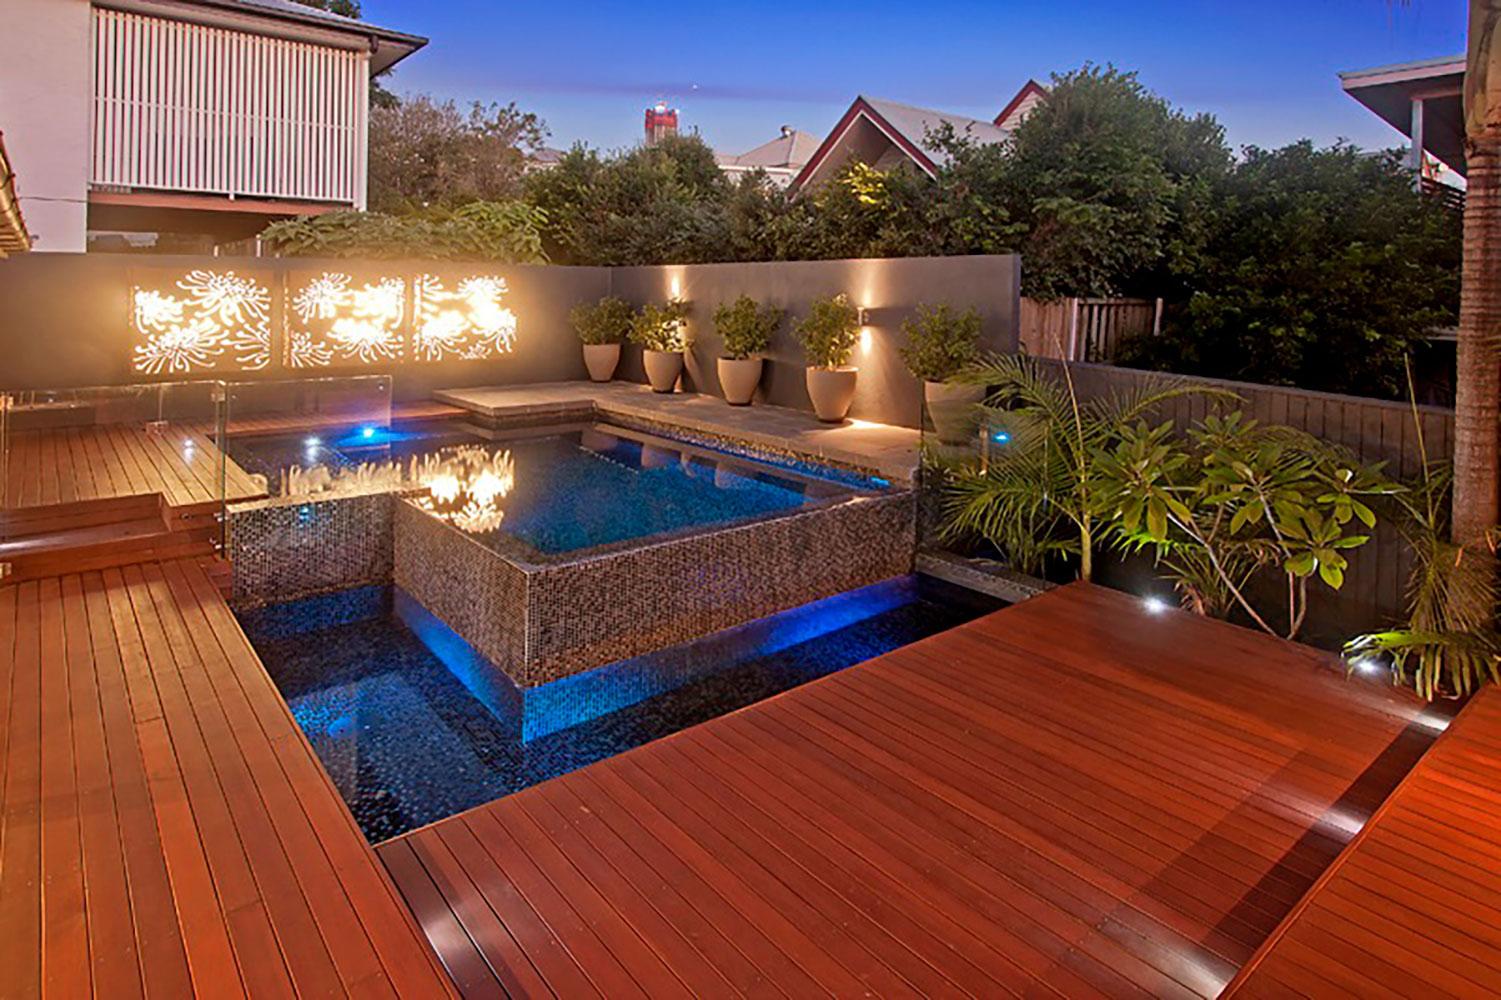 Pool Decking Options, Advantages and Tips